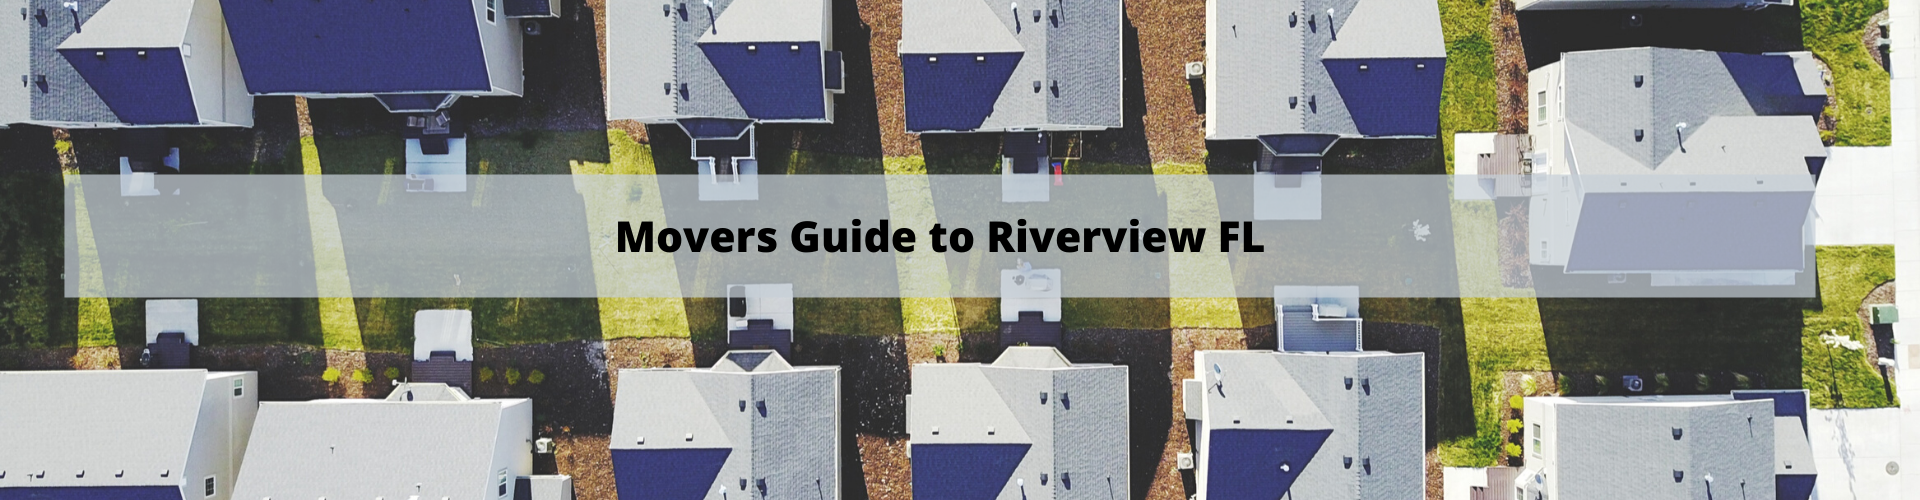 Movers Guide To Riverview FL